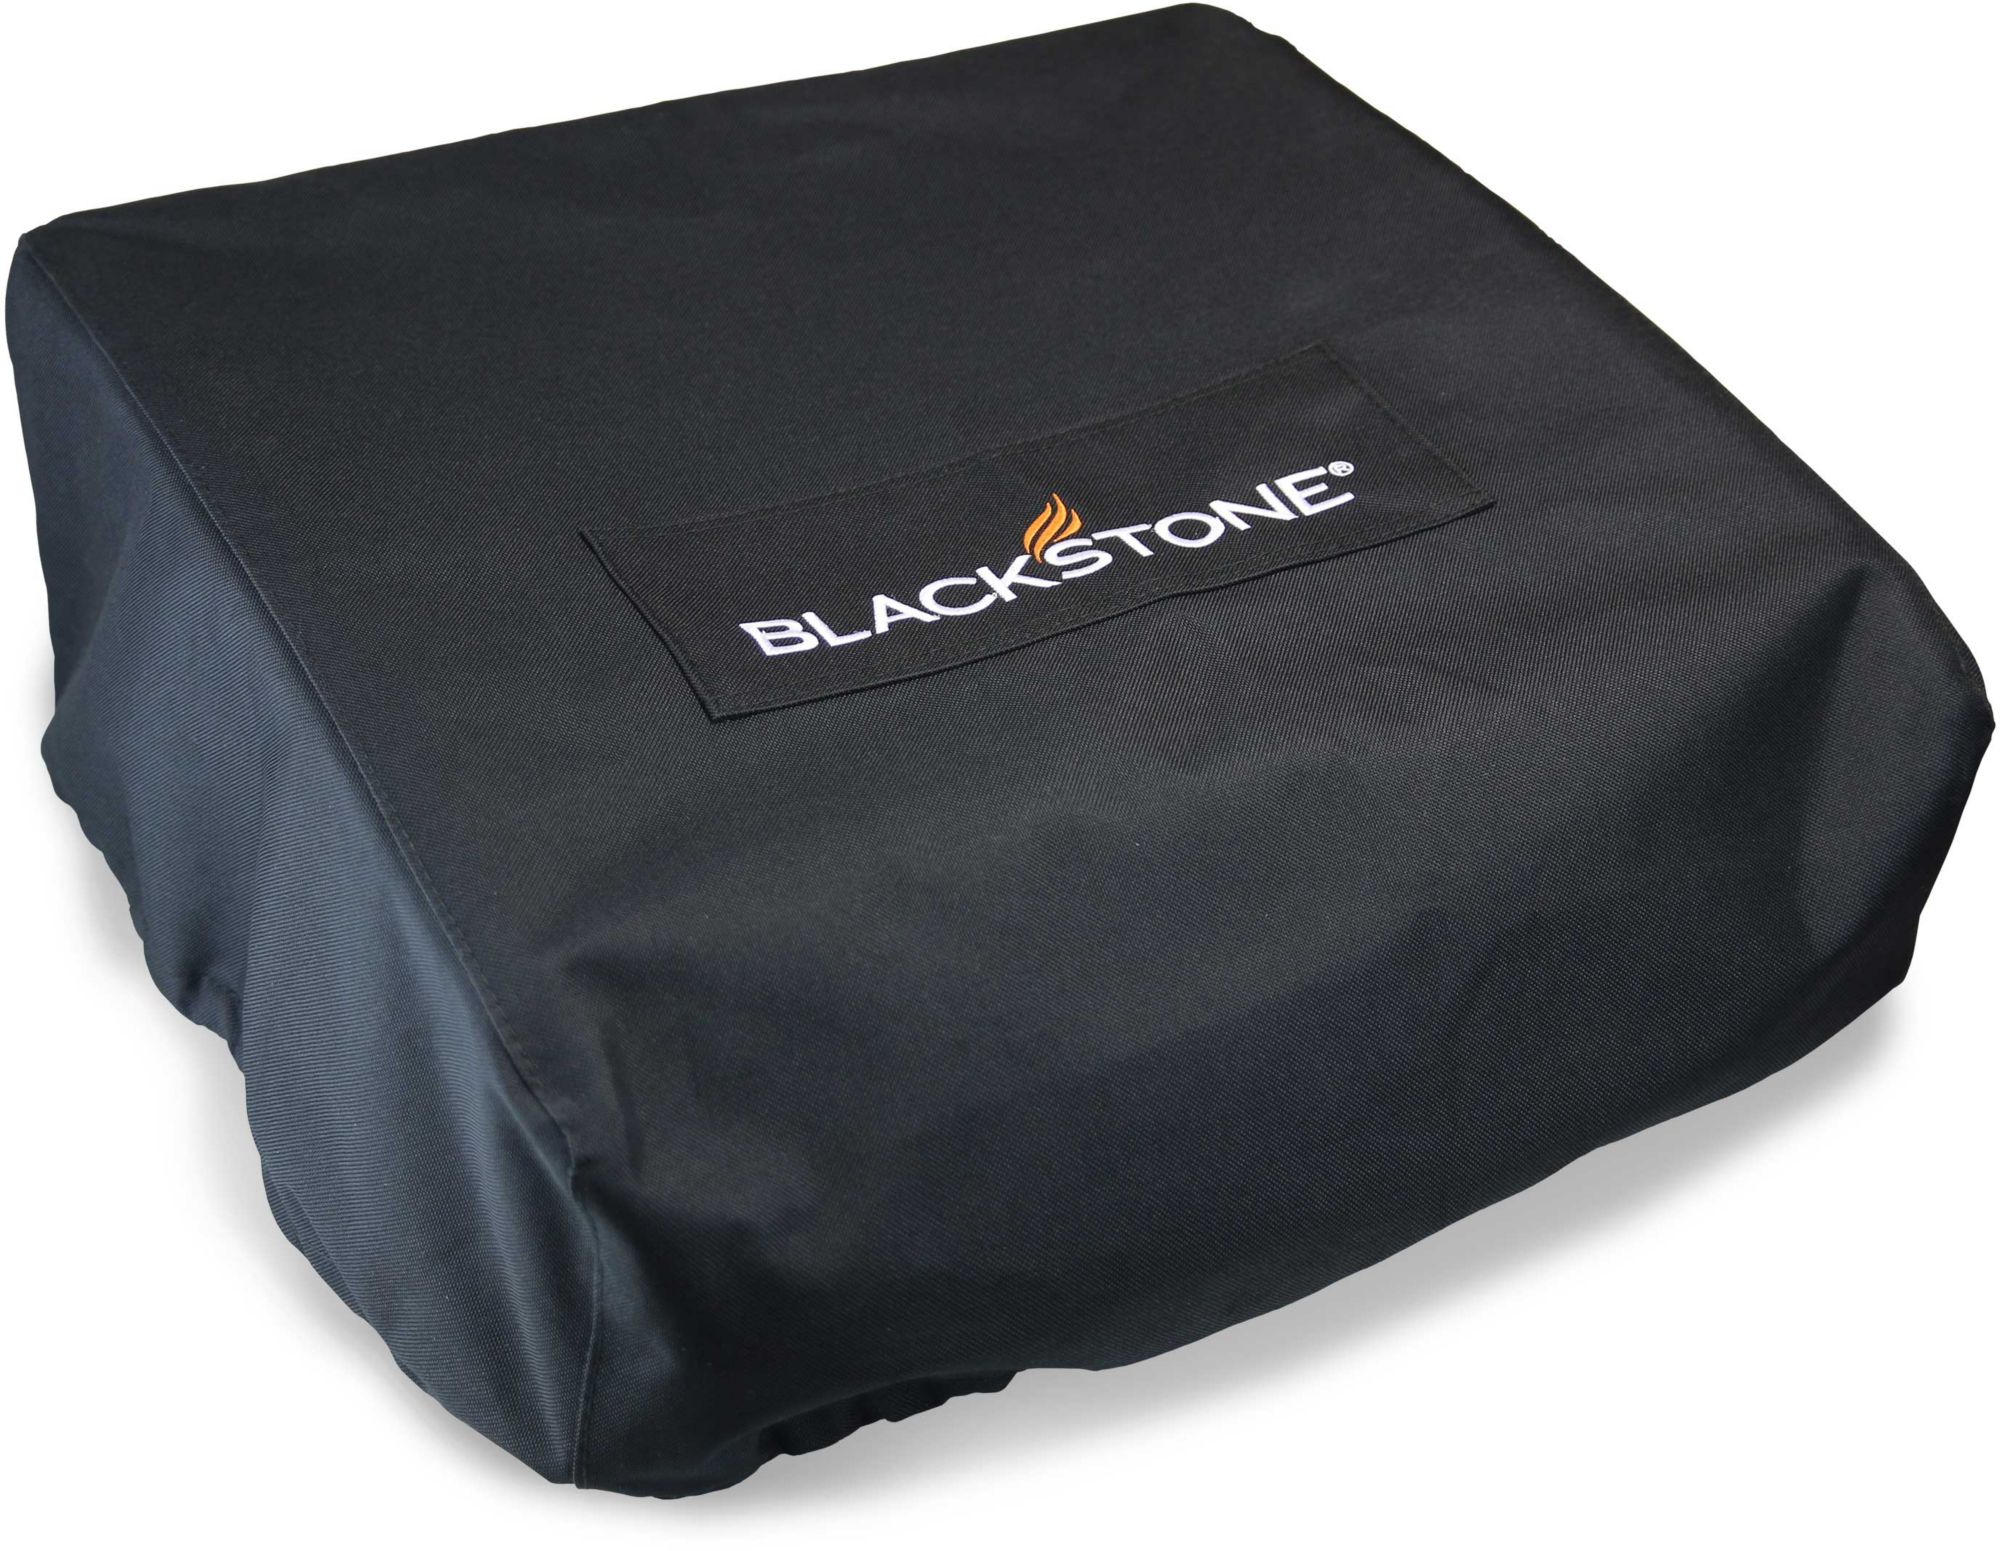 Blackstone 17 Griddle Cover and Carry Bag